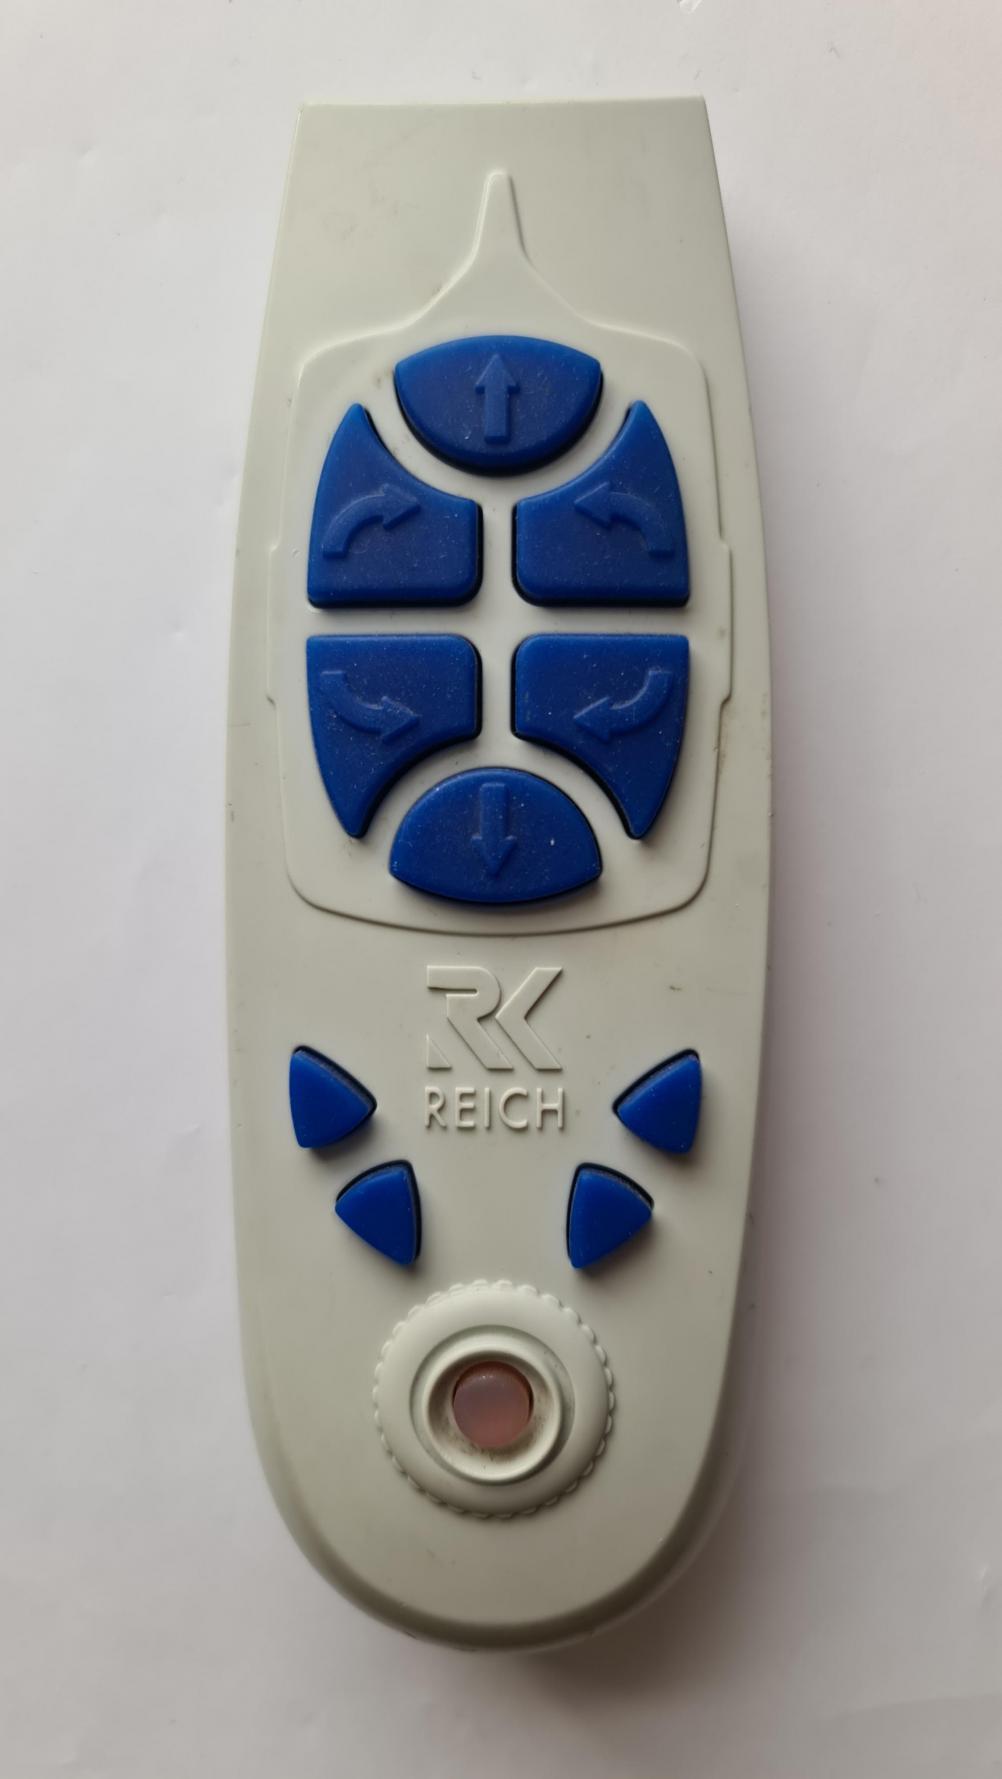 Reich  Remote Control - Front Image